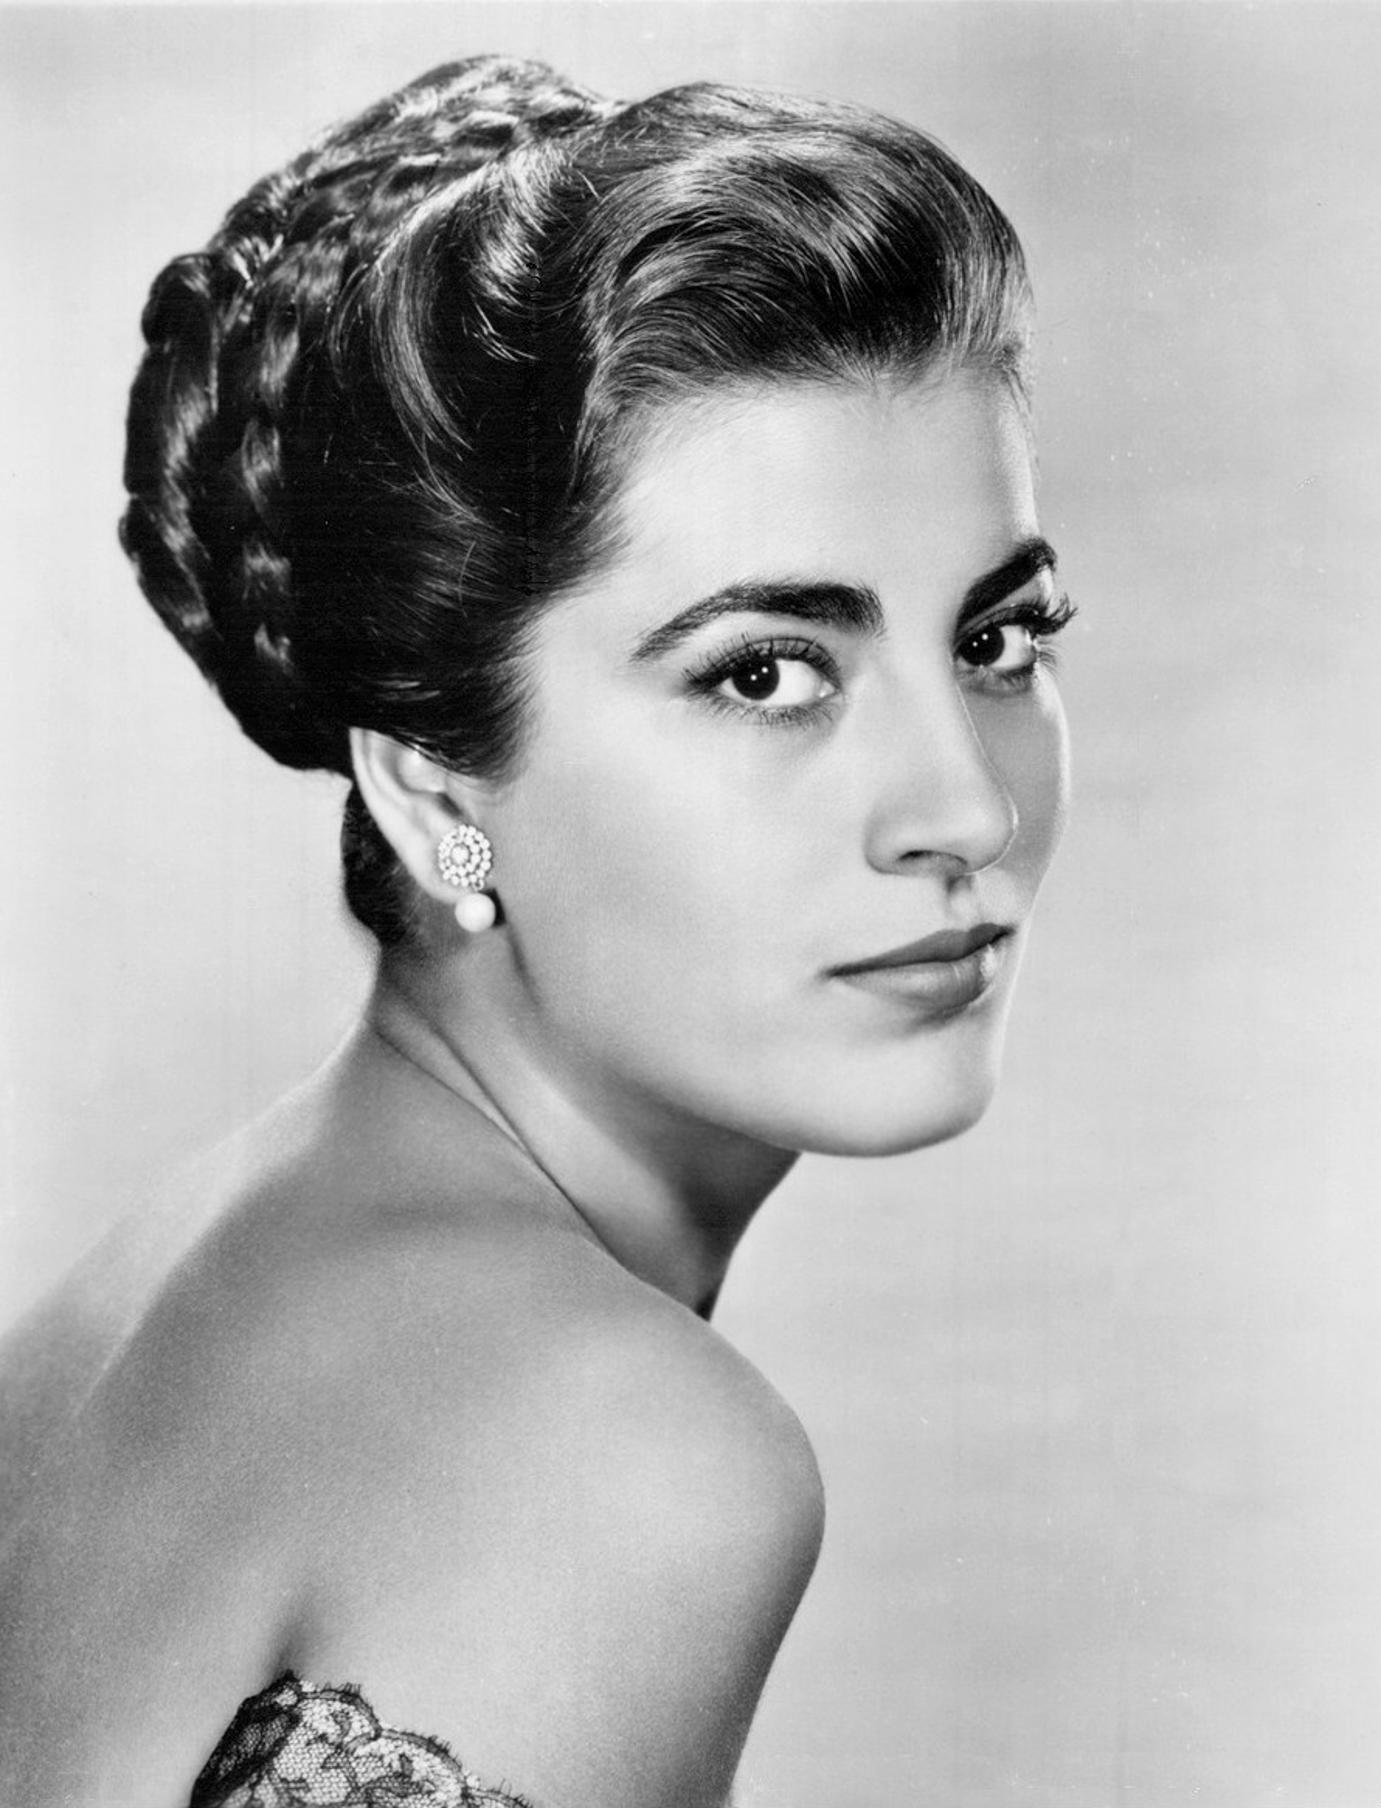 Greece S Irene Papas Who Earned Hollywood Fame Dies At 93 North